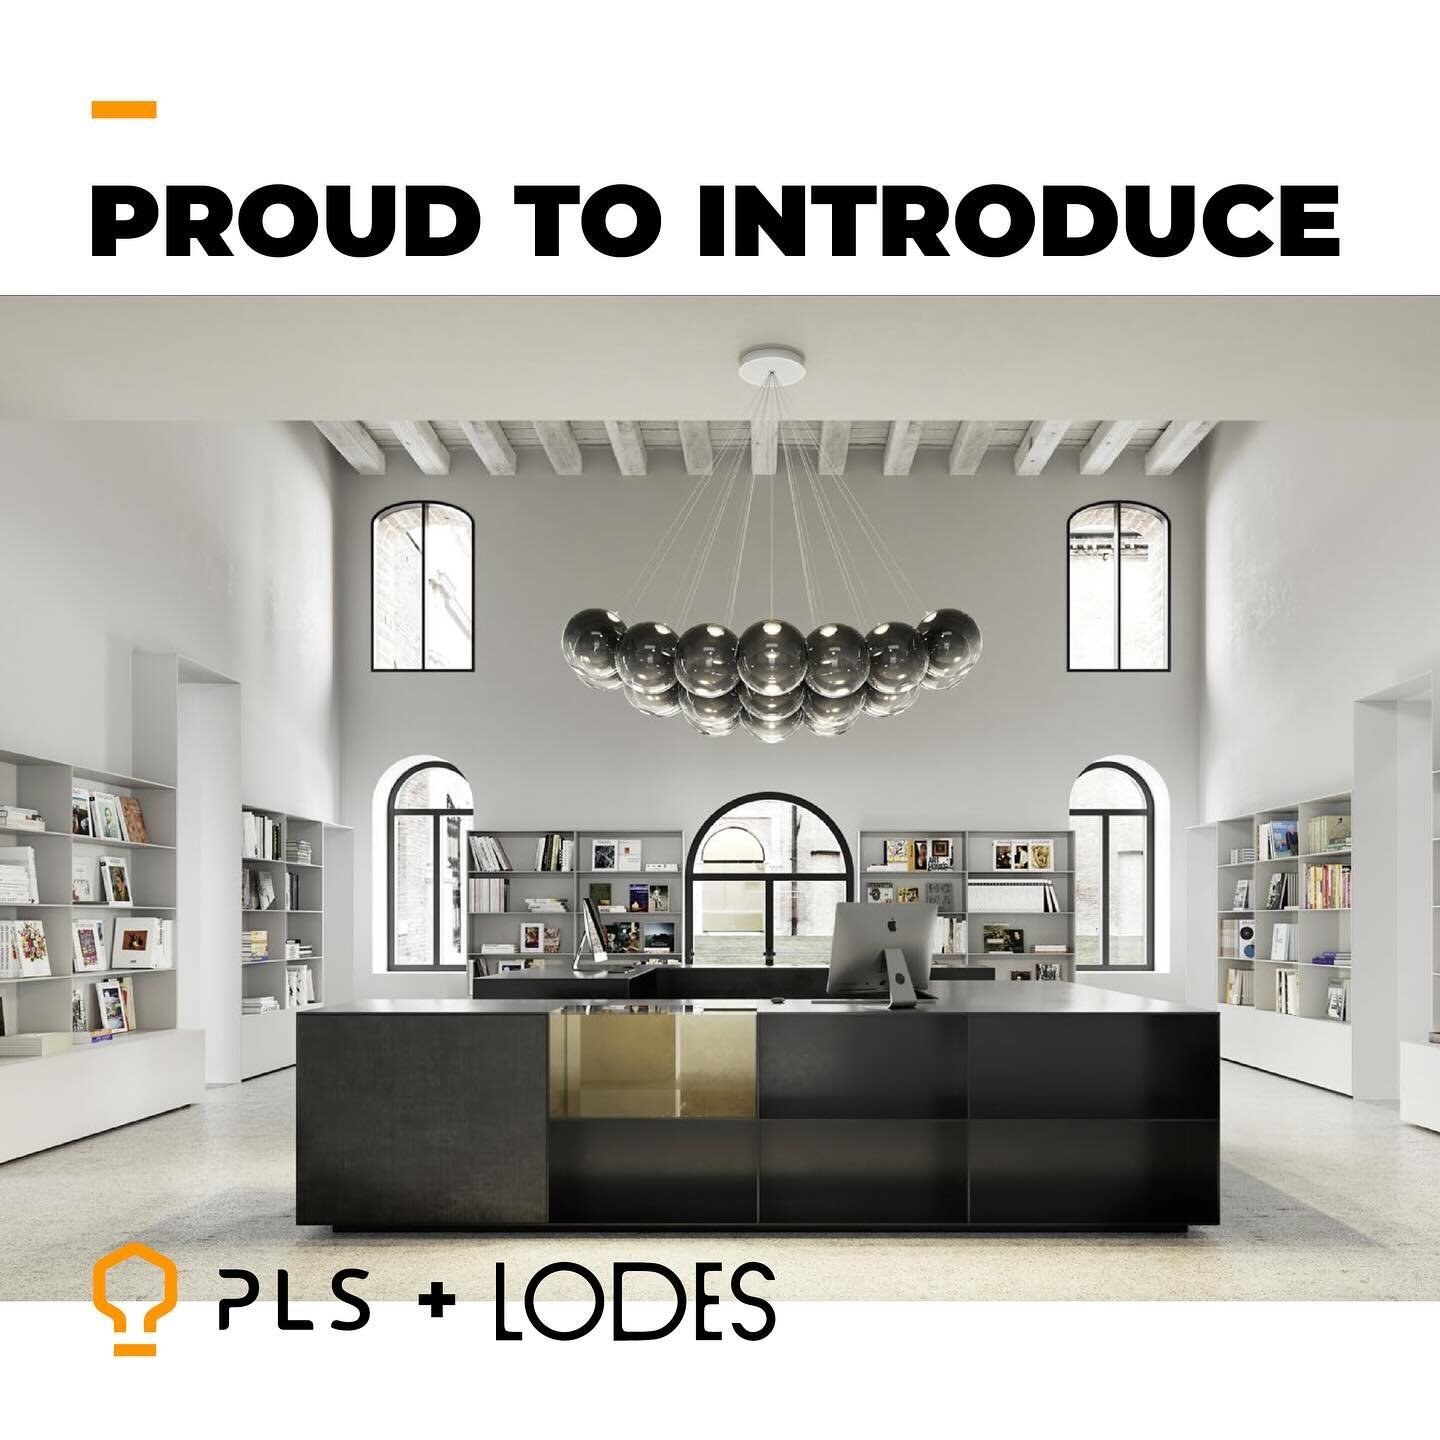 PROUD TO INTRODUCE |  LOBES USA 

Our Company - 

Previously known as Studio Italia Design, Lodes completed a rebrand process in June 2020 &mdash; on the occasion of its 70th anniversary &mdash; which culminated with the unveiling of the new logo and